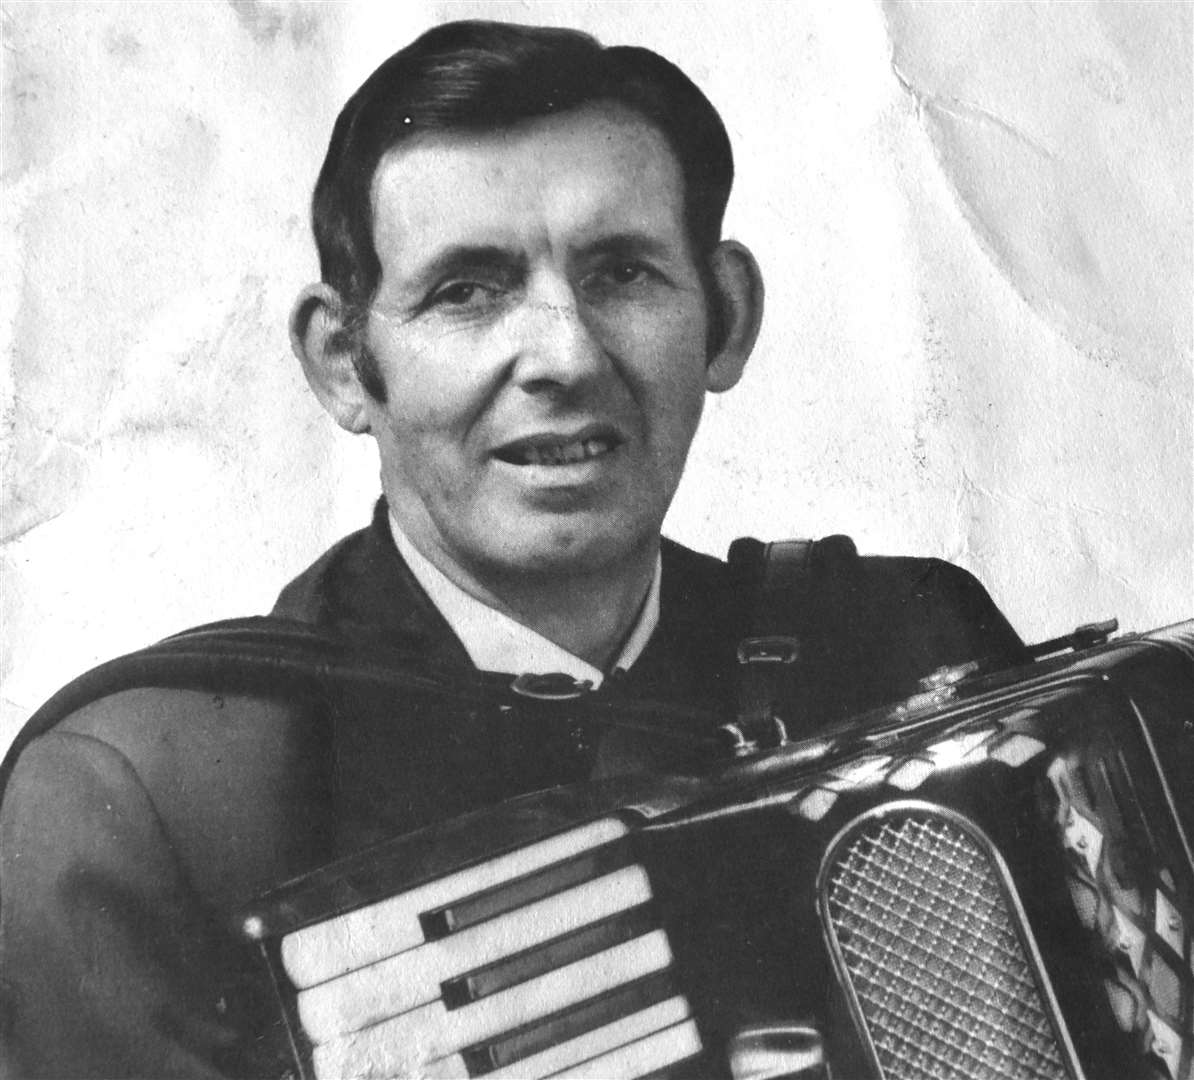 The late Eann Nicolson, accordion mentor for Noel Donaldson. Picture courtesy of Mozart Allan, music publishers, Glasgow.